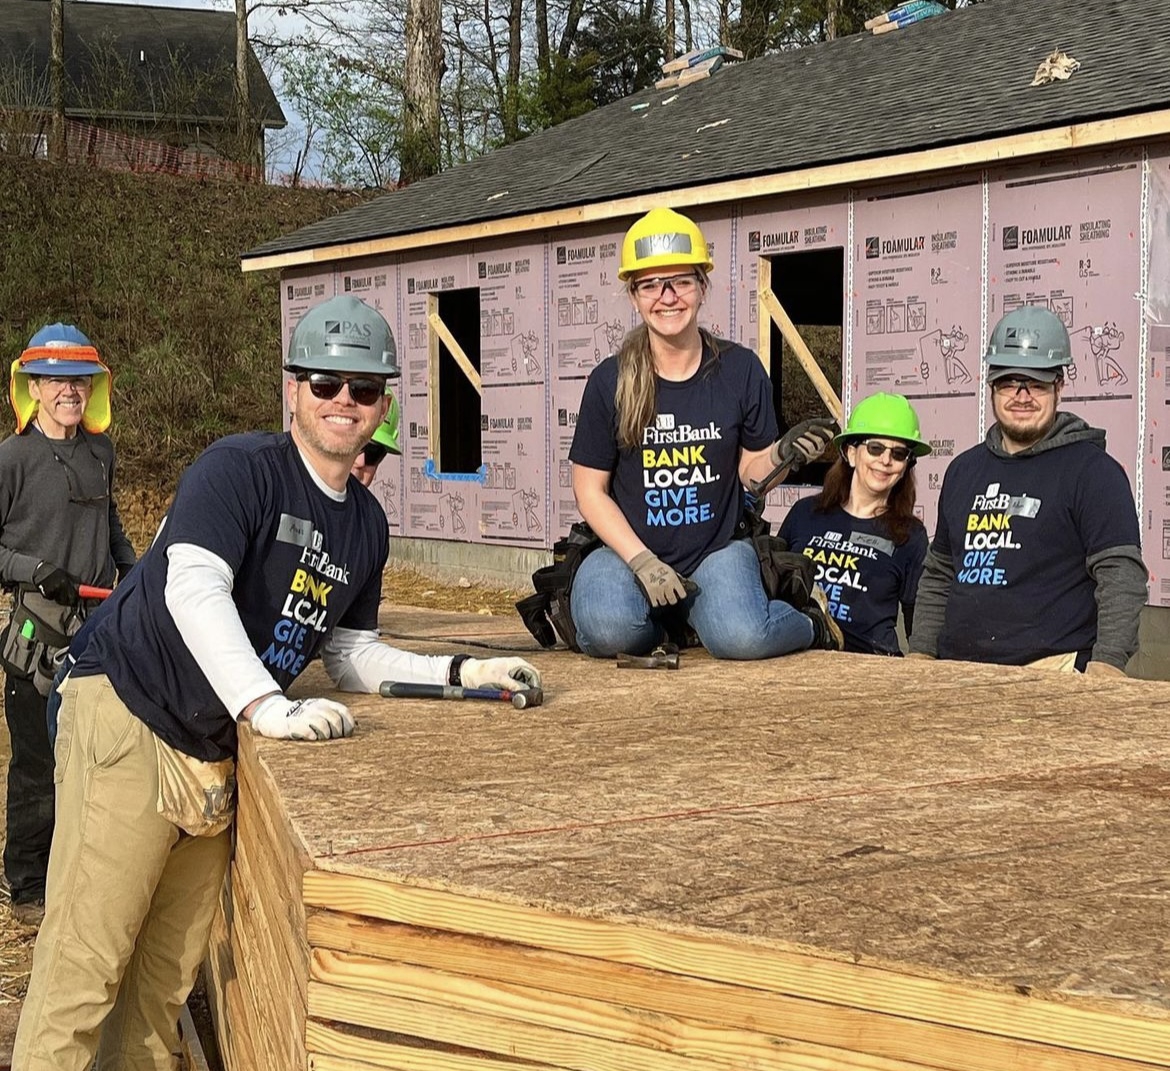 NEW_Knoxville_Habitat for Humanity Build #2 (14).jpg